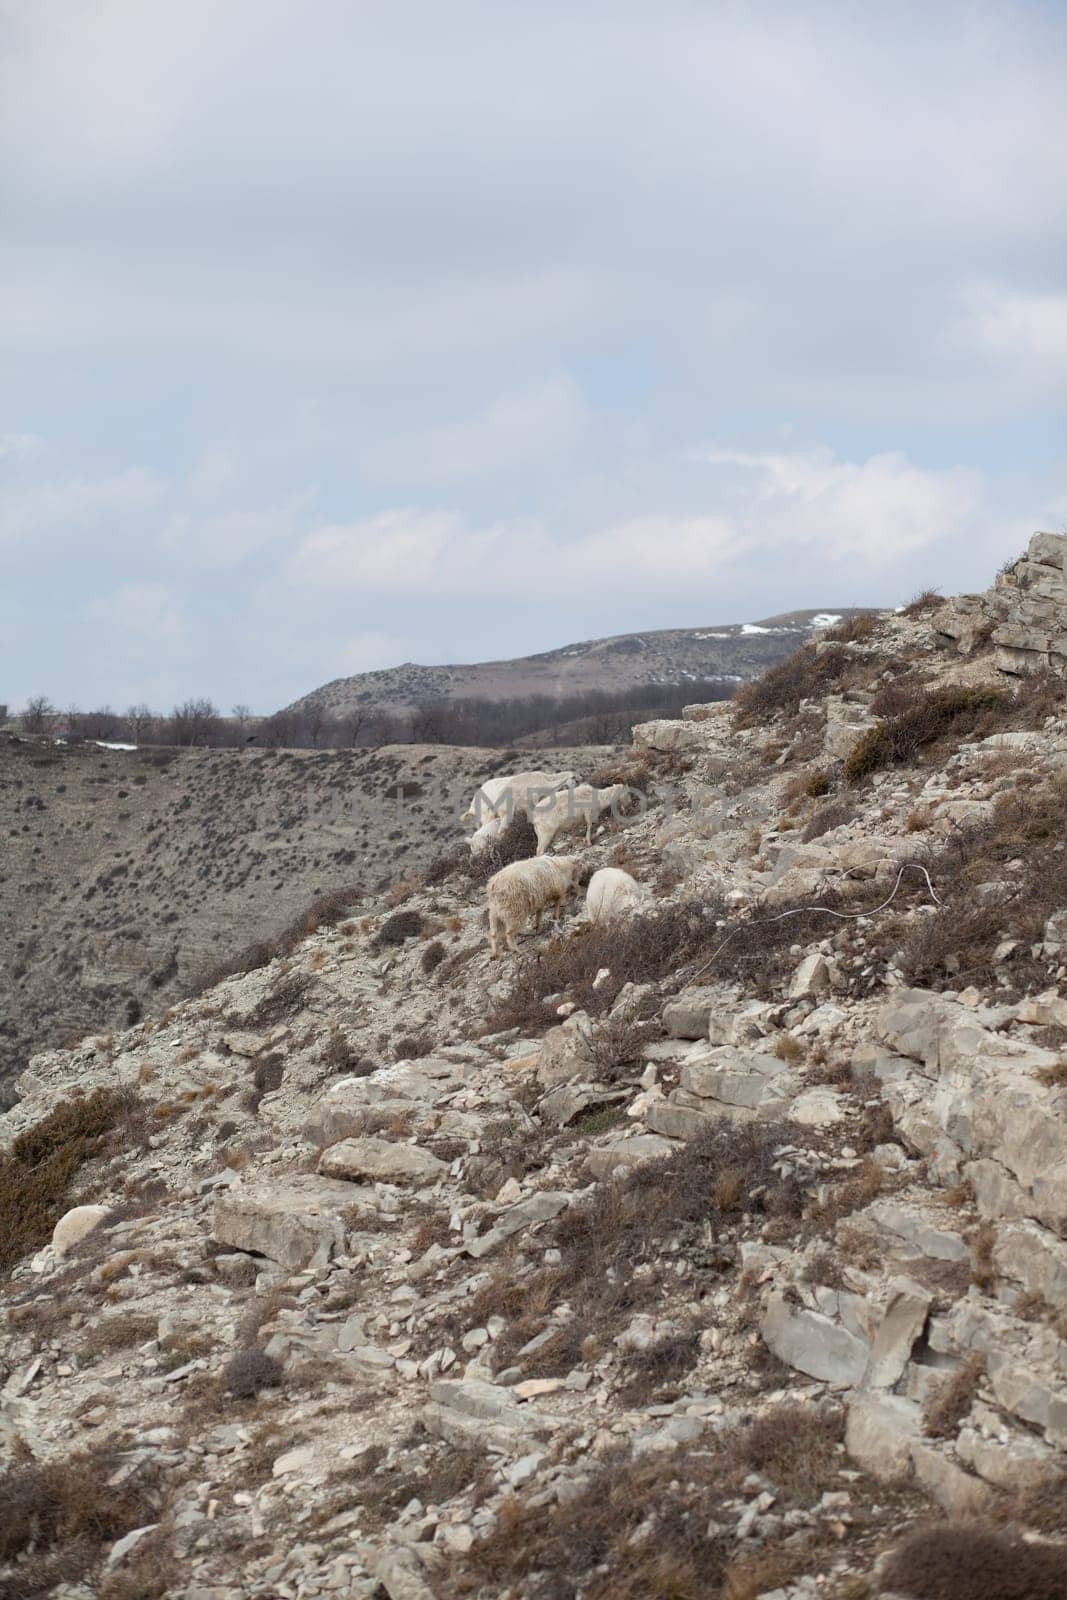 Goats are resting in the rocks on the mountainside. by AnatoliiFoto